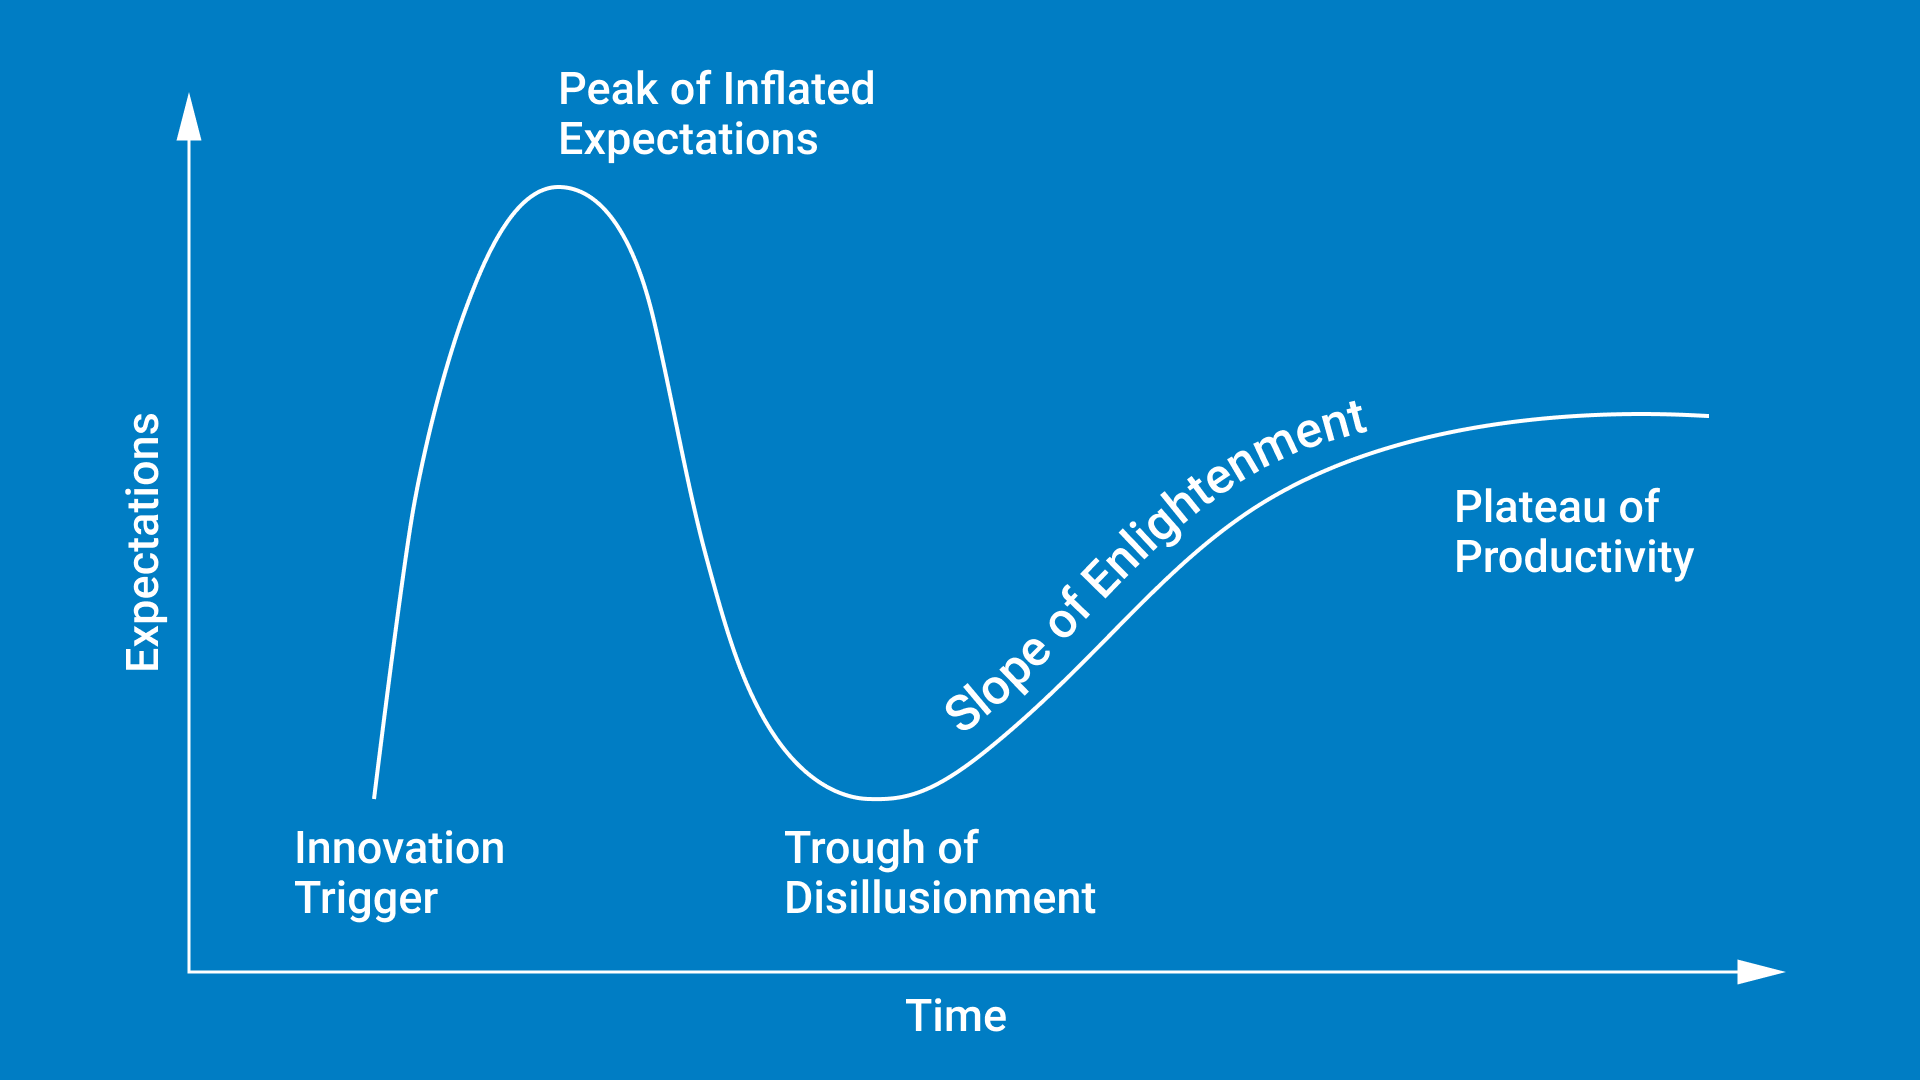 The adoption life cycle curve shows how the hype builds up, falls down and returns to normal